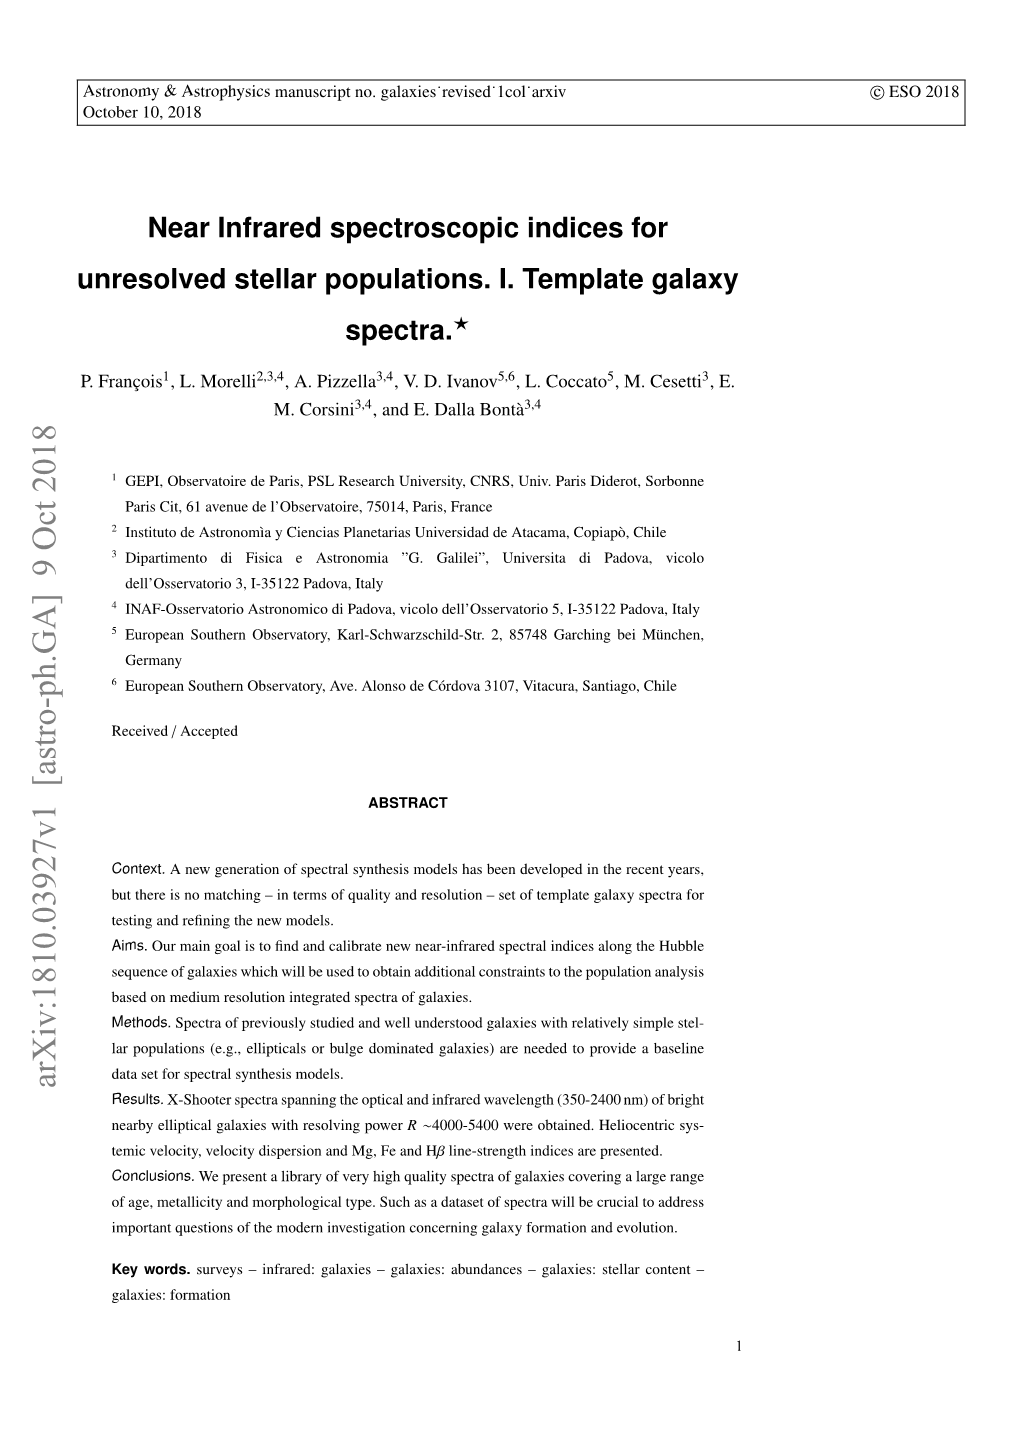 Near Infrared Spectroscopic Indices for Unresolved Stellar Populations. I. Template Galaxy Spectra.?